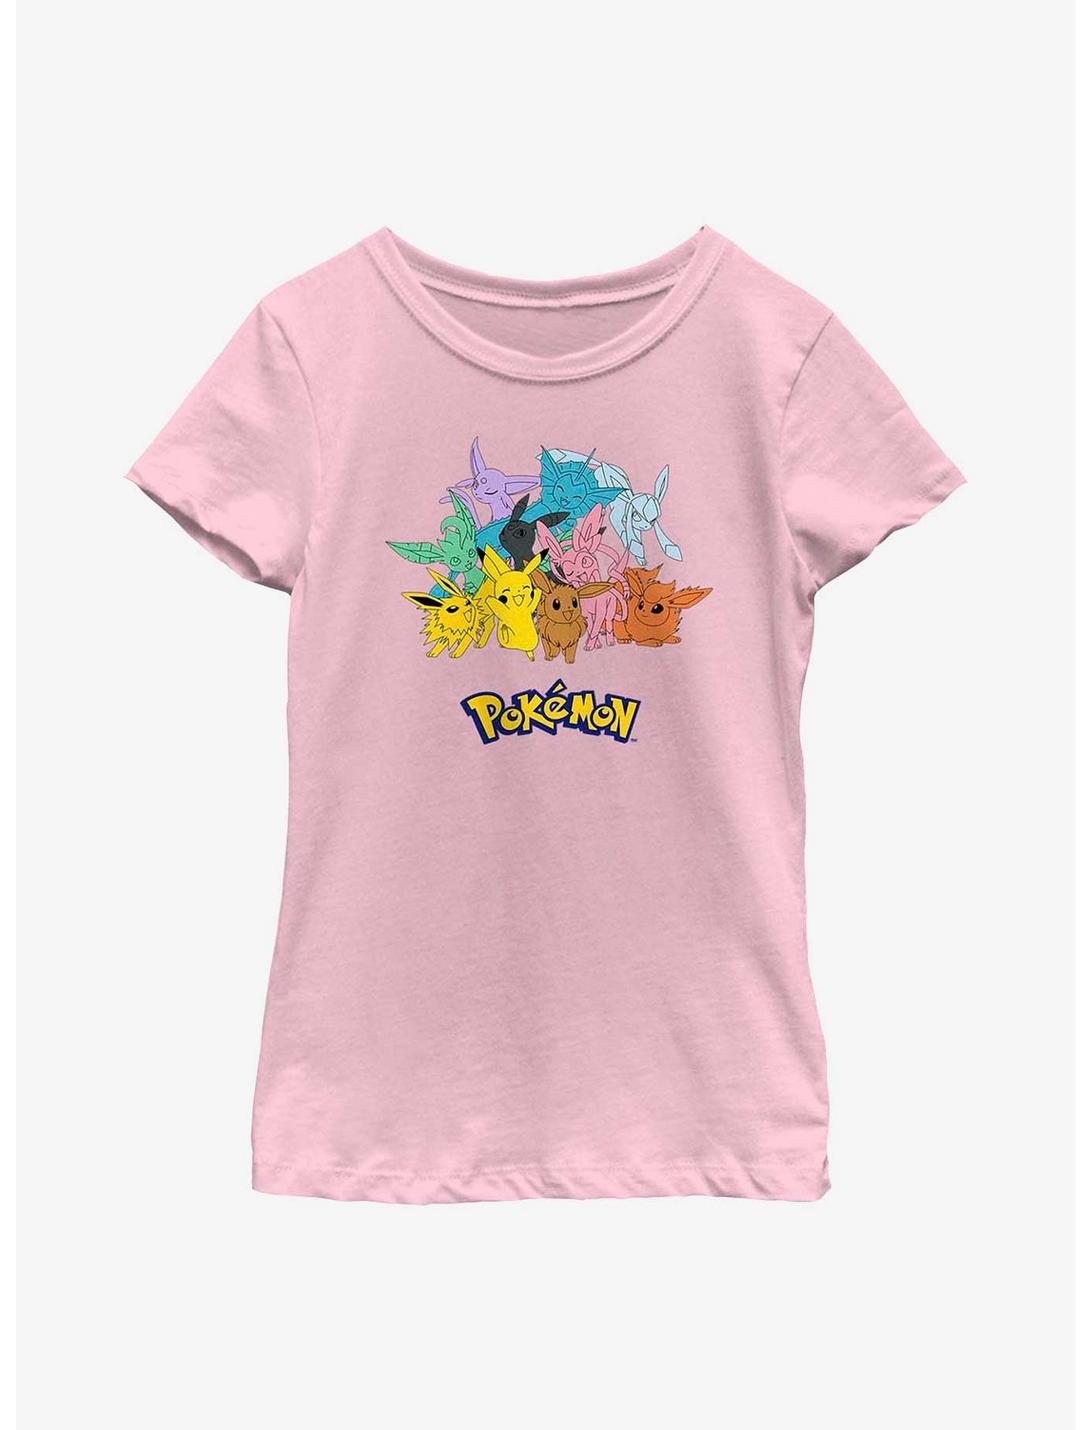 Pokemon Pikachu With Eeveelutions Youth Girls T-Shirt, PINK, hi-res